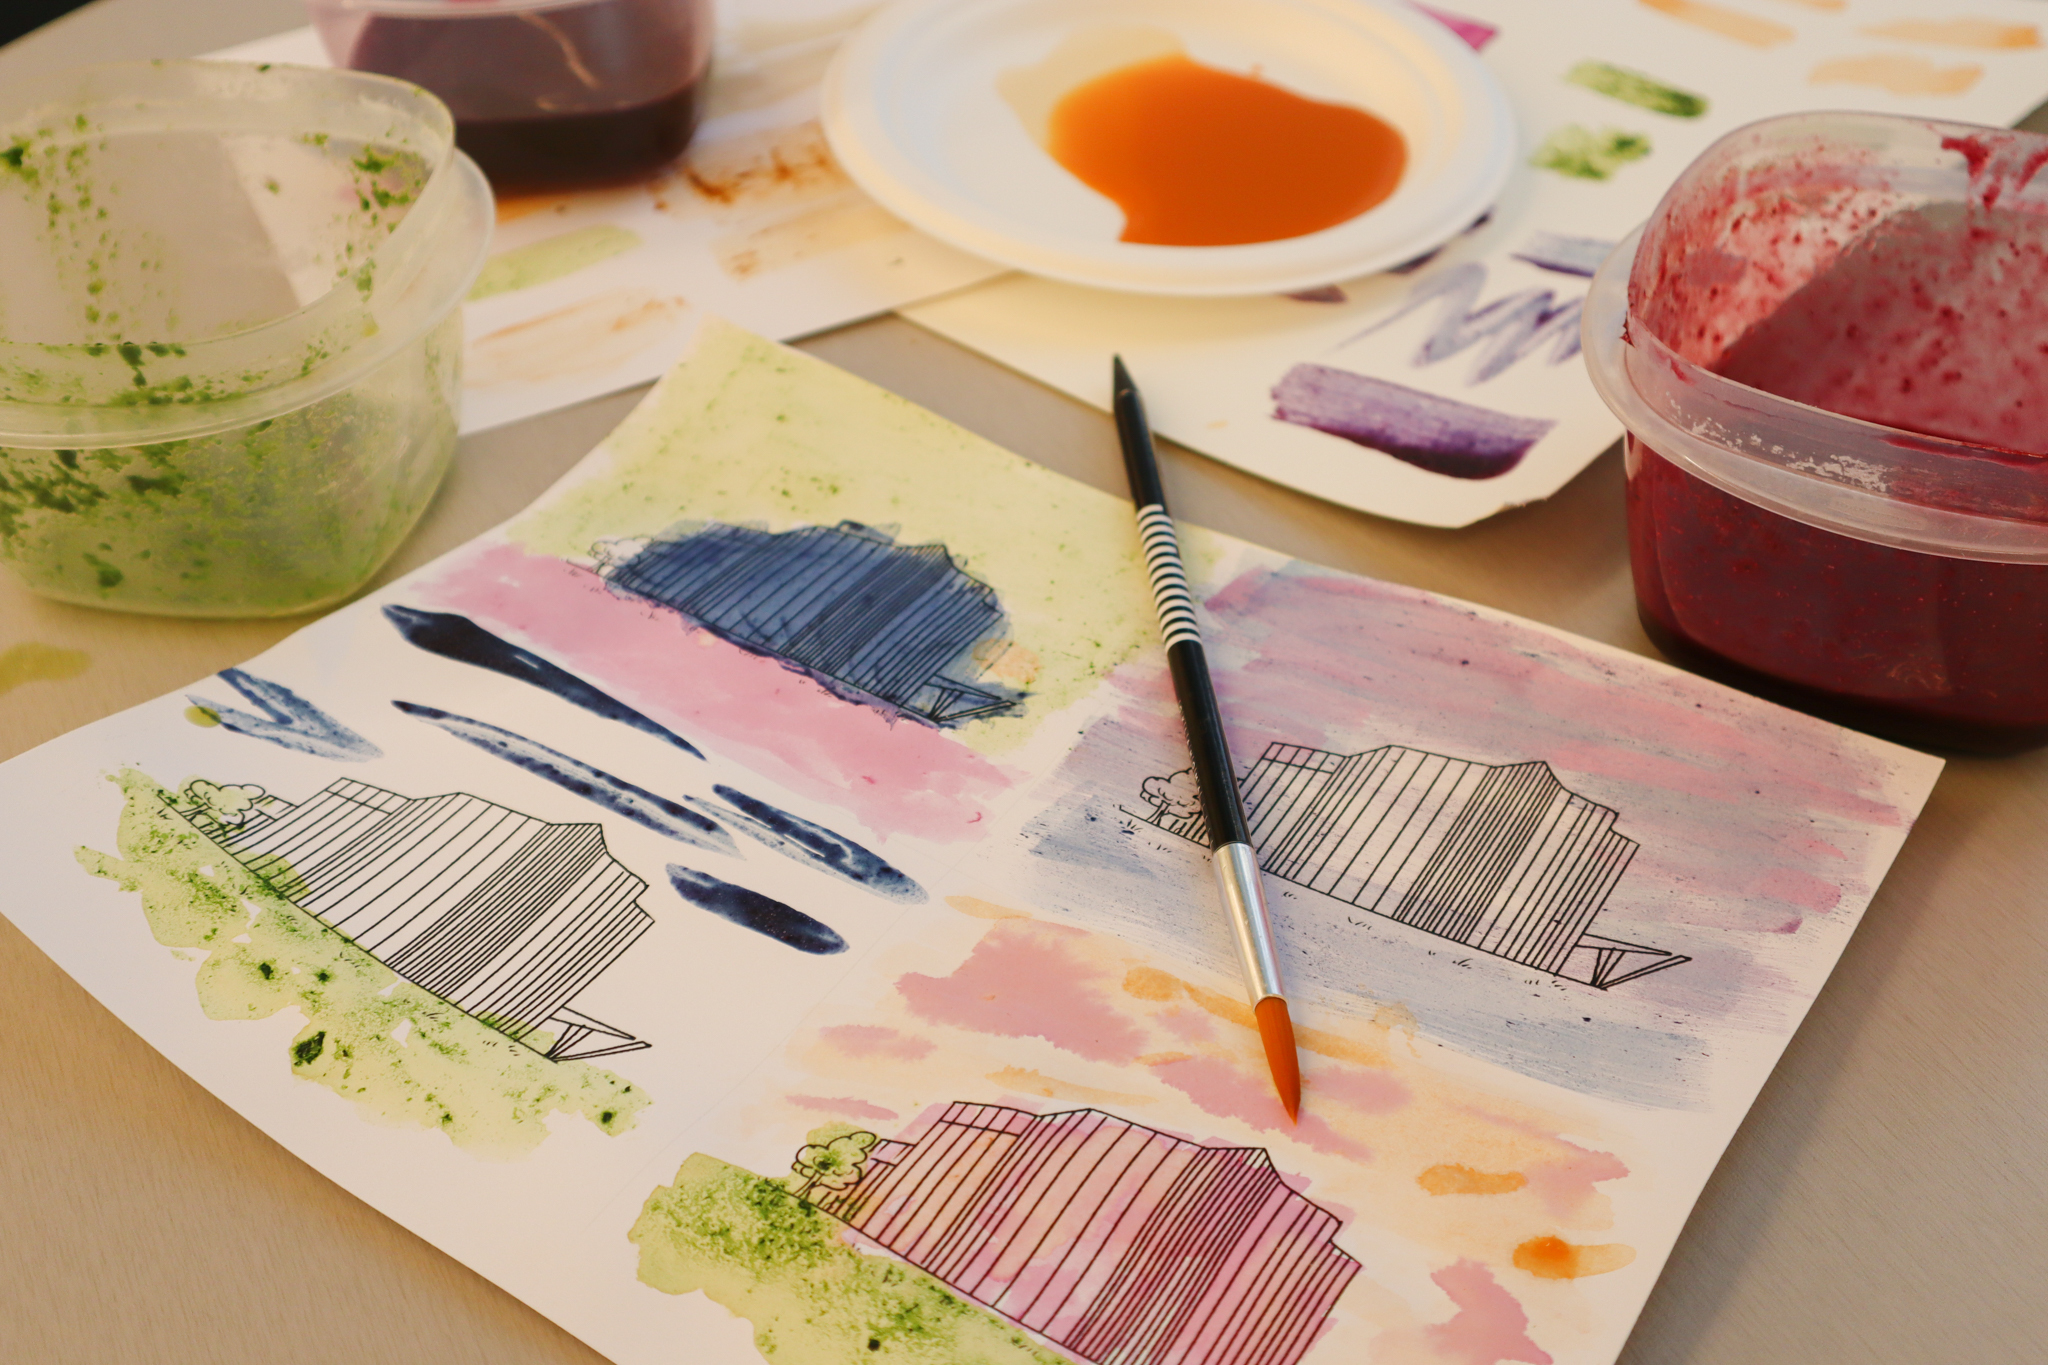 A watercolor painting of four buildings sits on a table. We can see containers of green, purple and orange ink in containers. A black paintbrush sits on the watercolor.